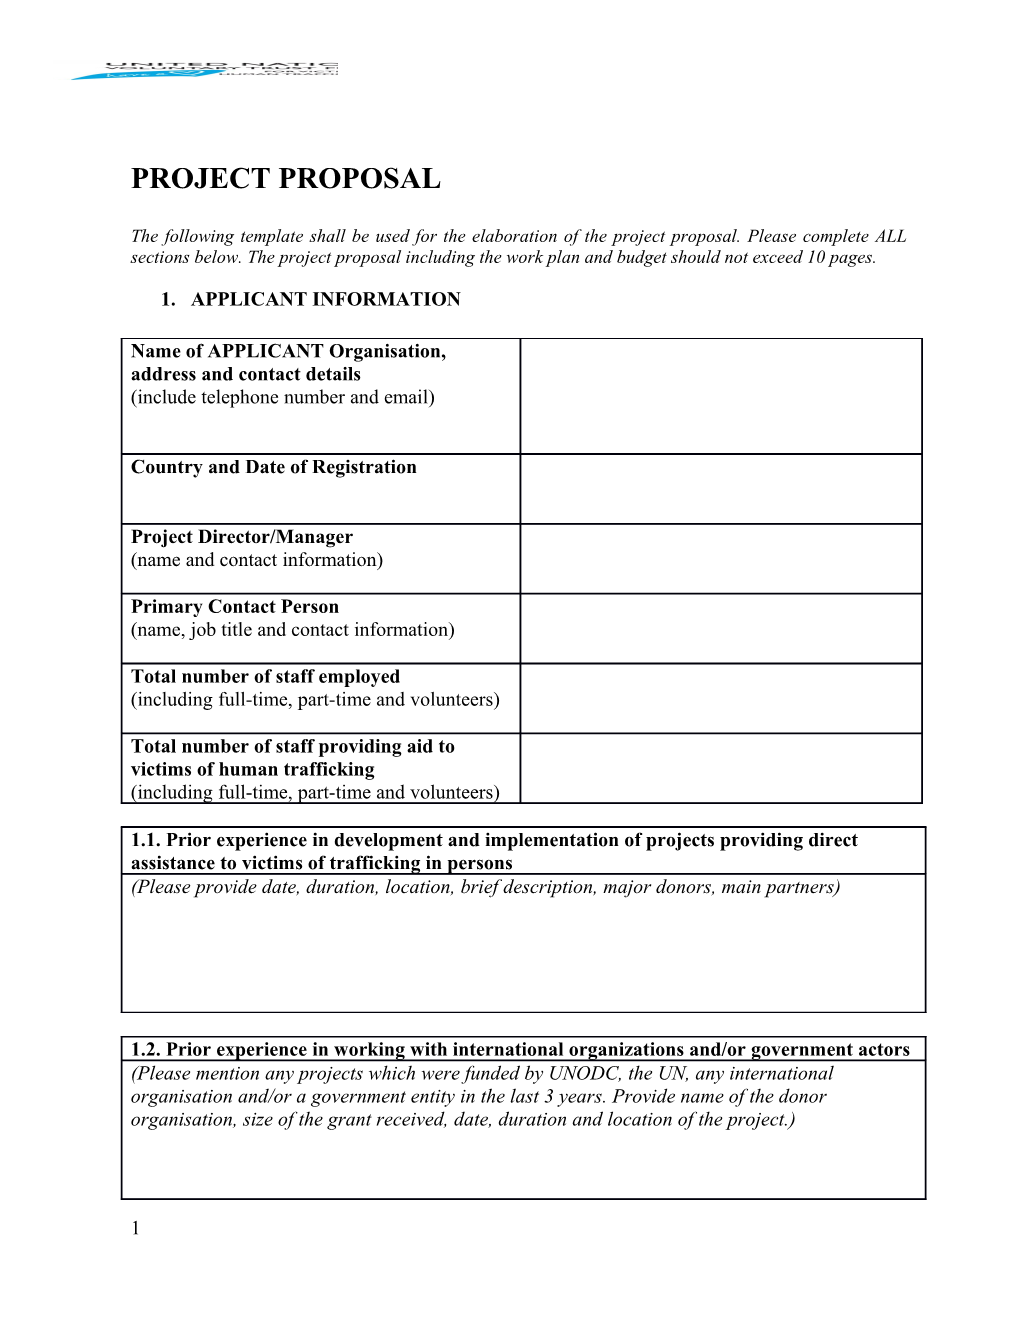 The Following Template Shall Be Used for the Elaboration of the Project Proposal. Please